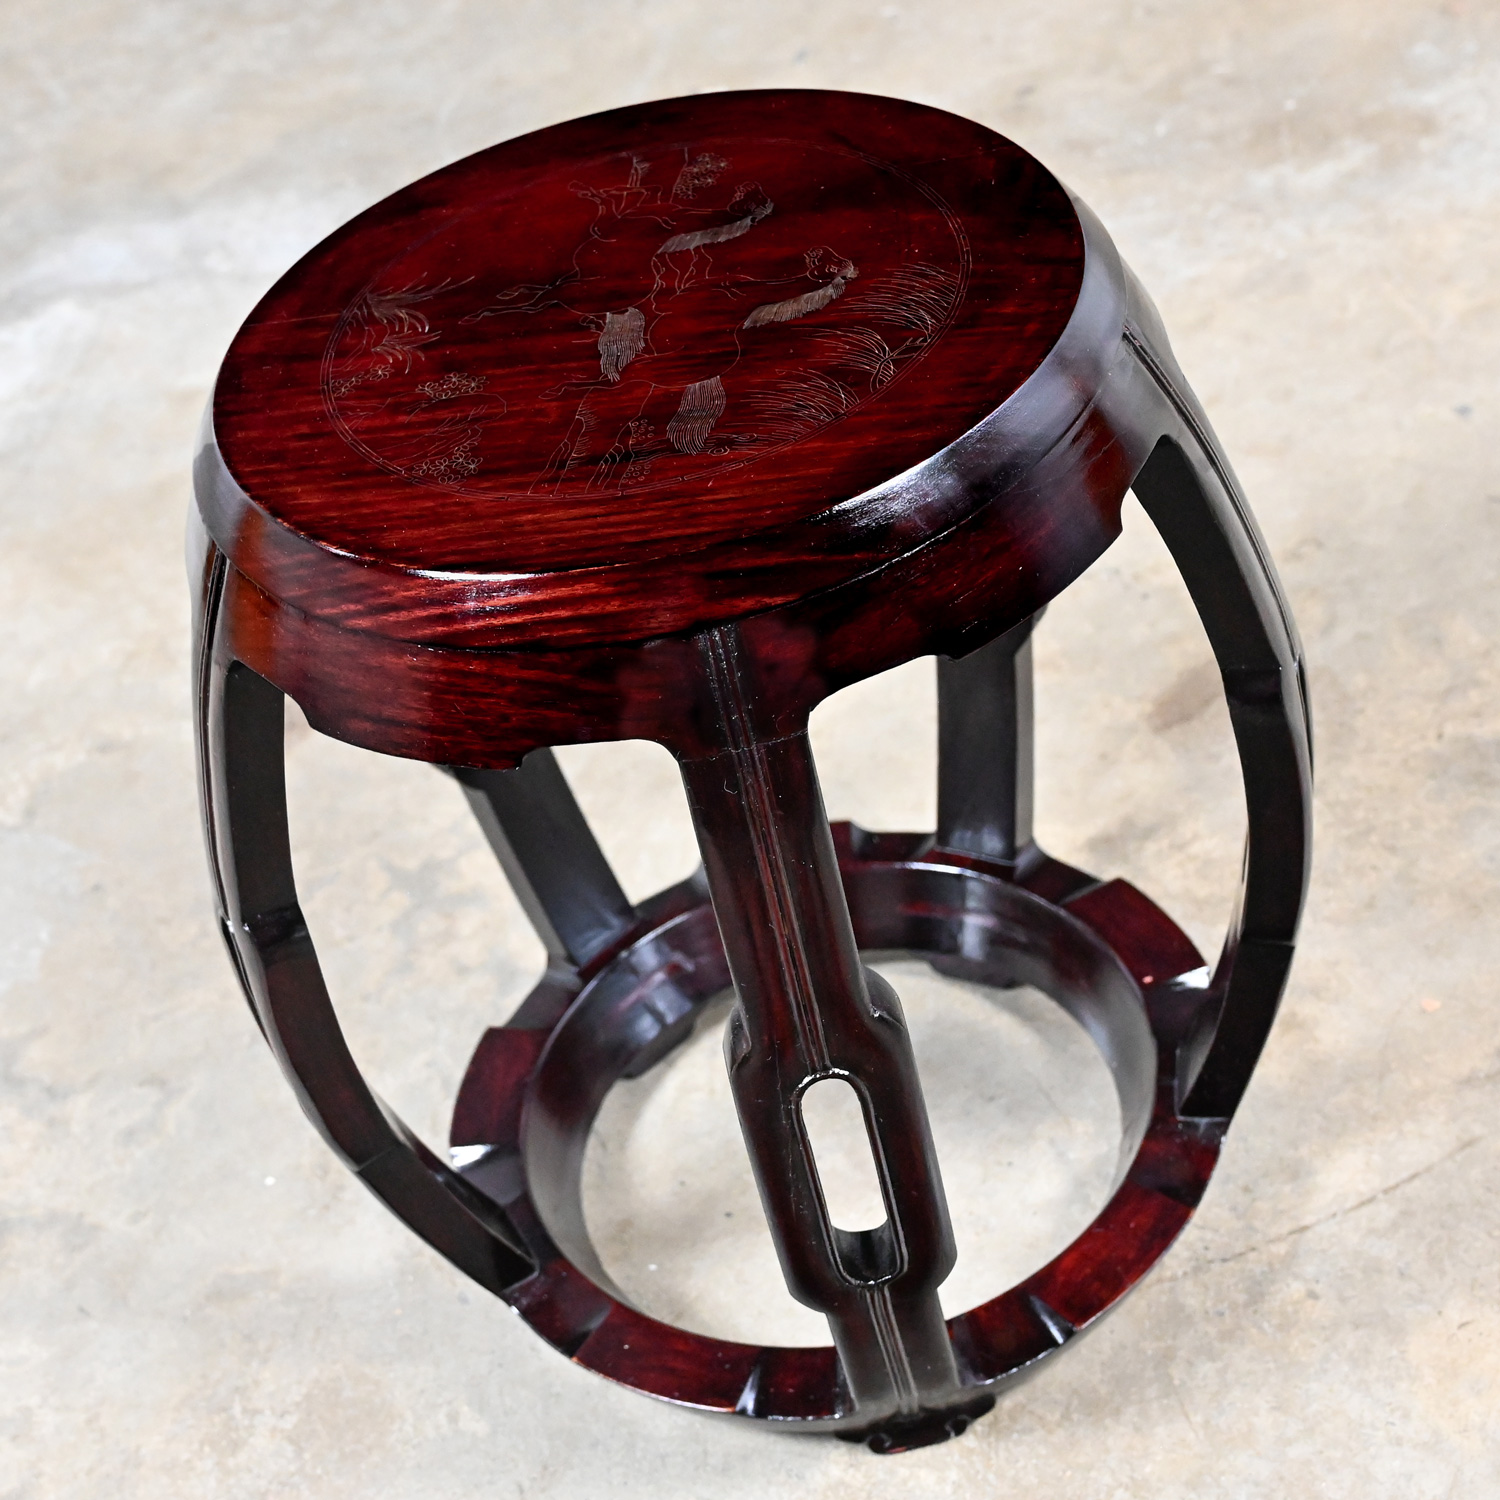 Mid 20th Century Chinoiserie Asian Rosewood Barrel Drum Table or Garden Stool with Brass Inlaid Design